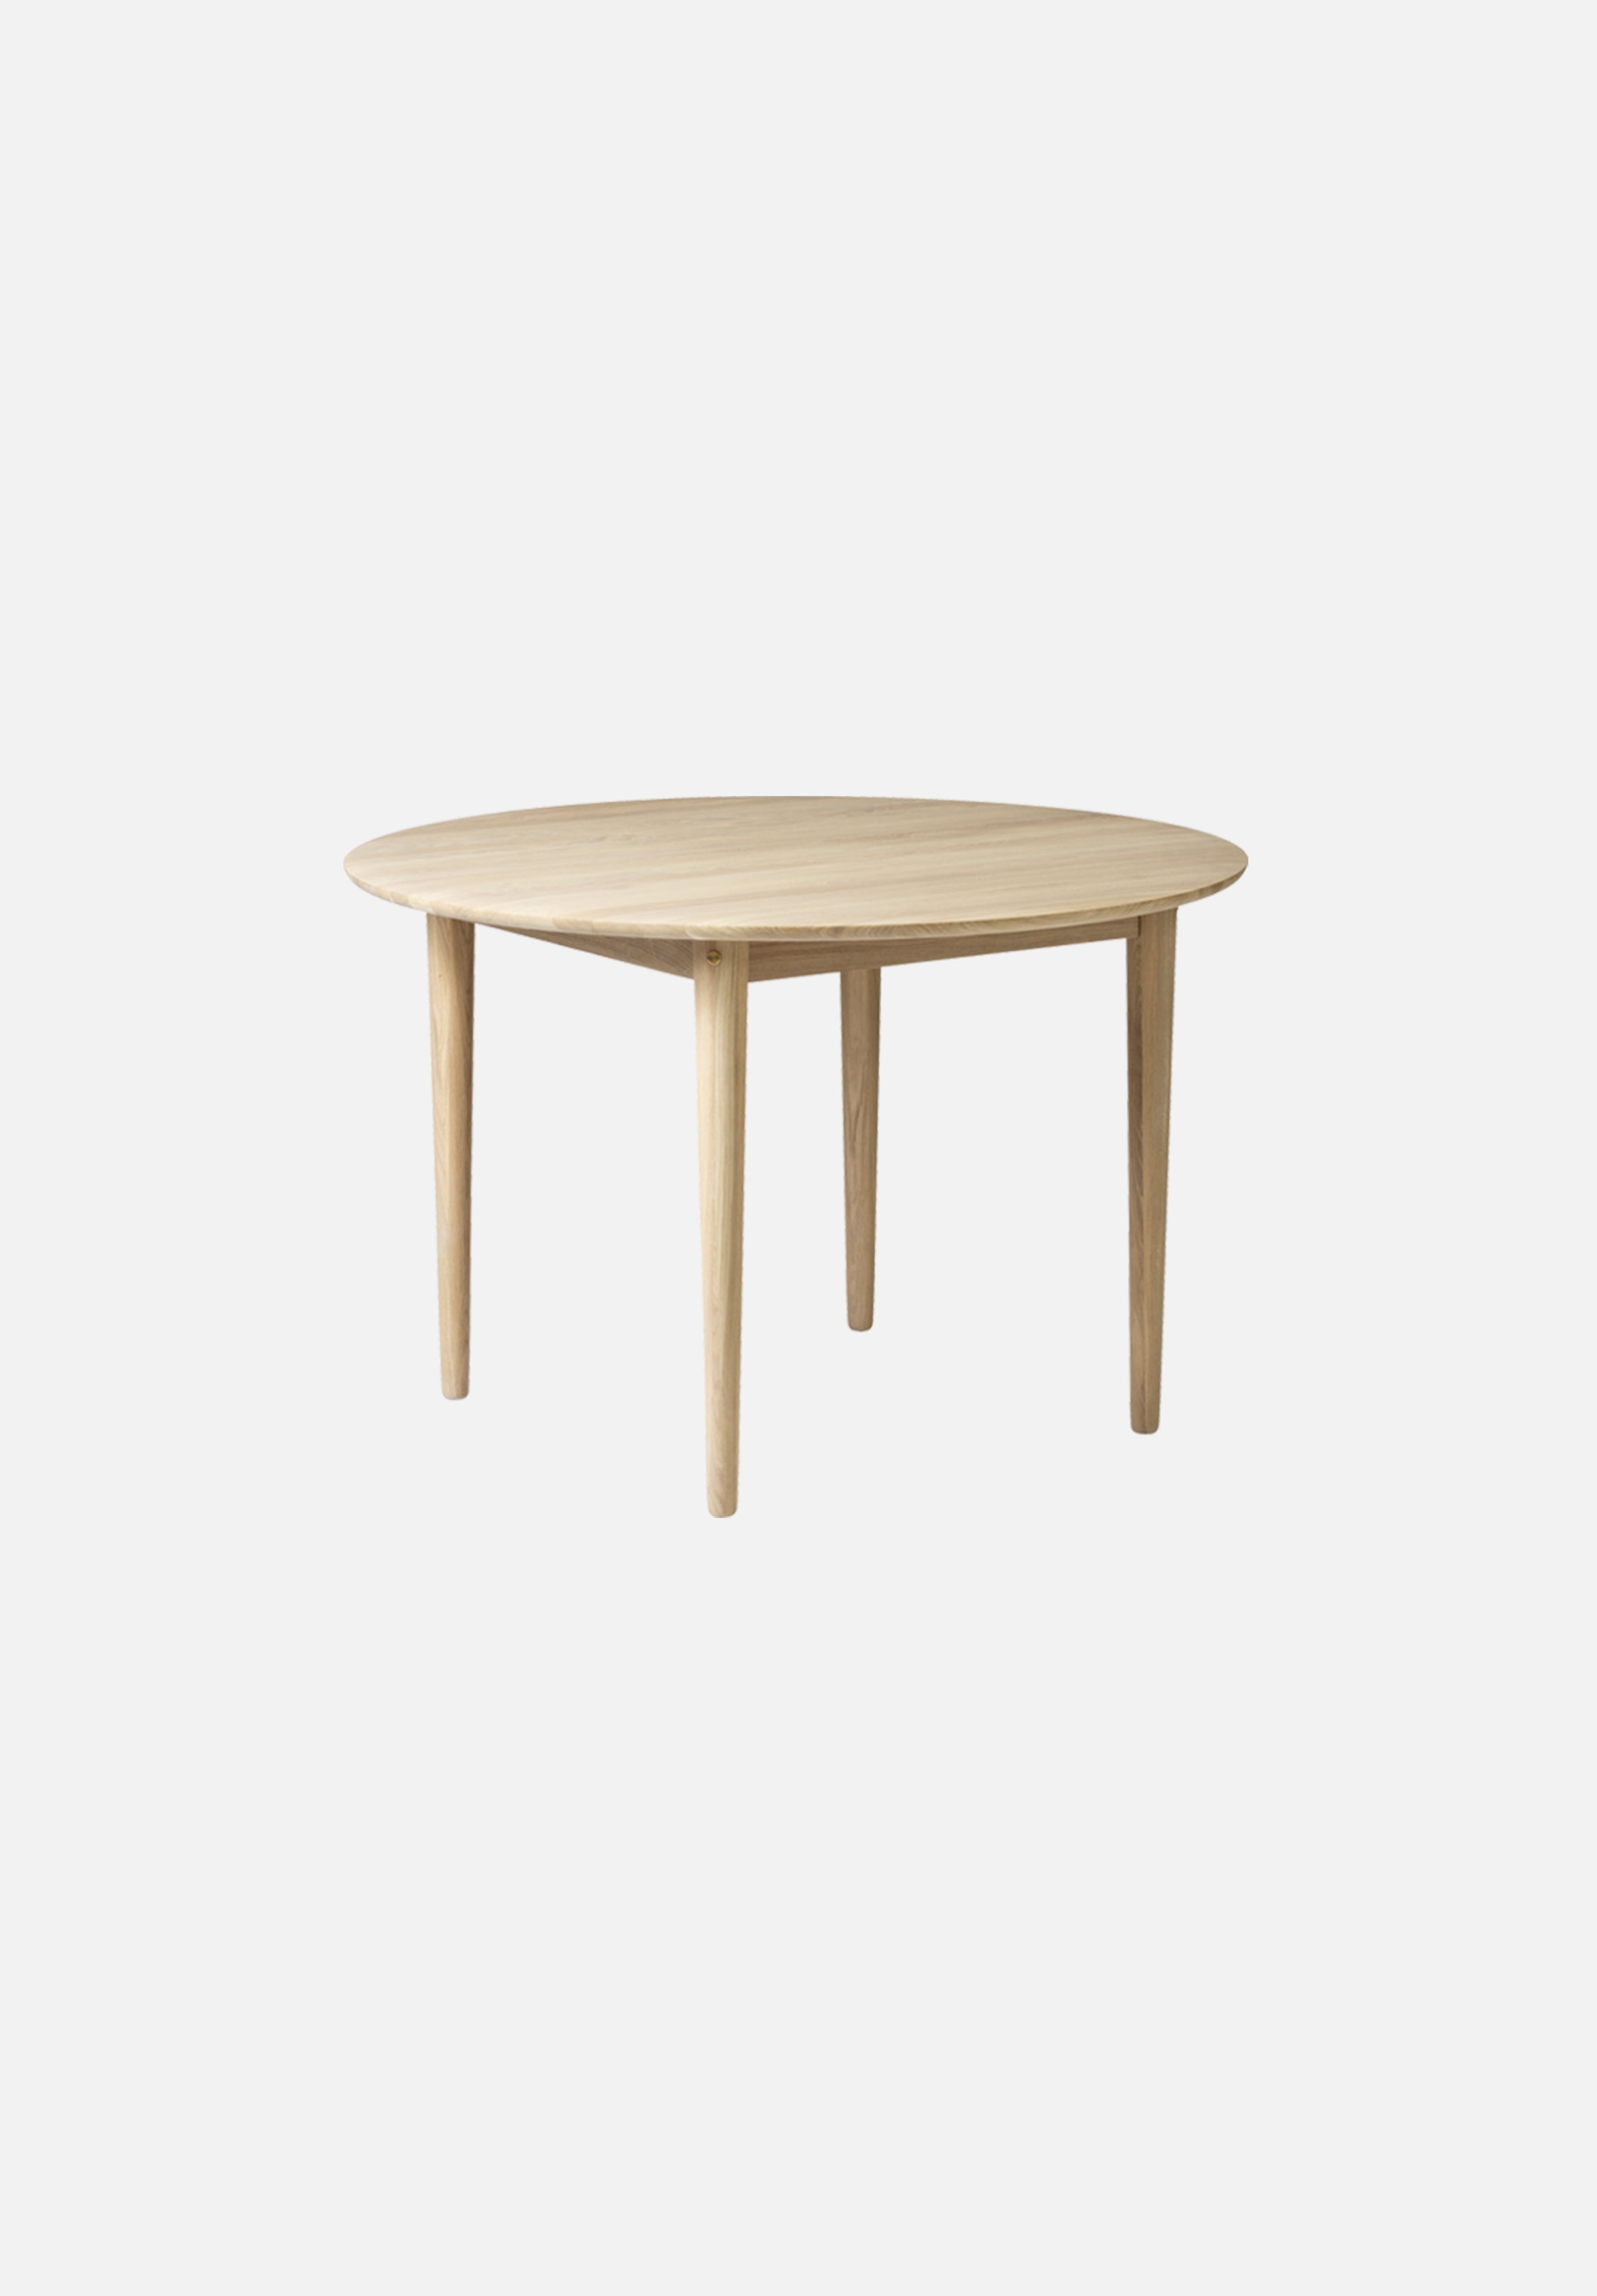 C62 Table By Fdb Mobler Average